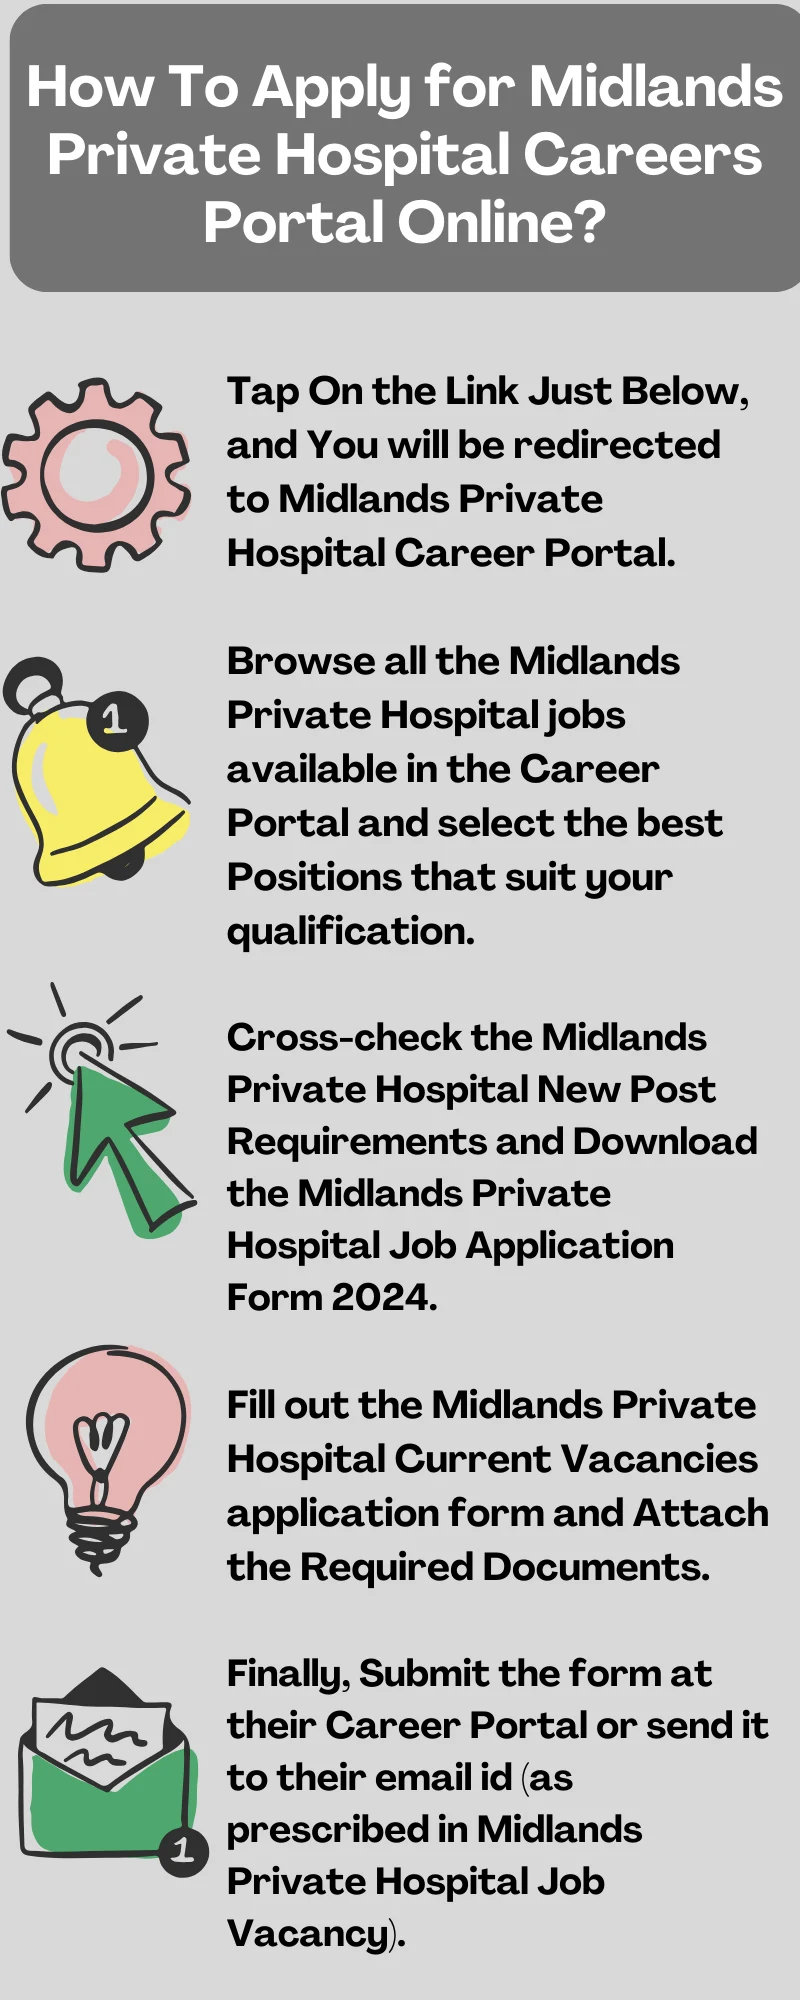 How To Apply for Midlands Private Hospital Careers Portal Online?